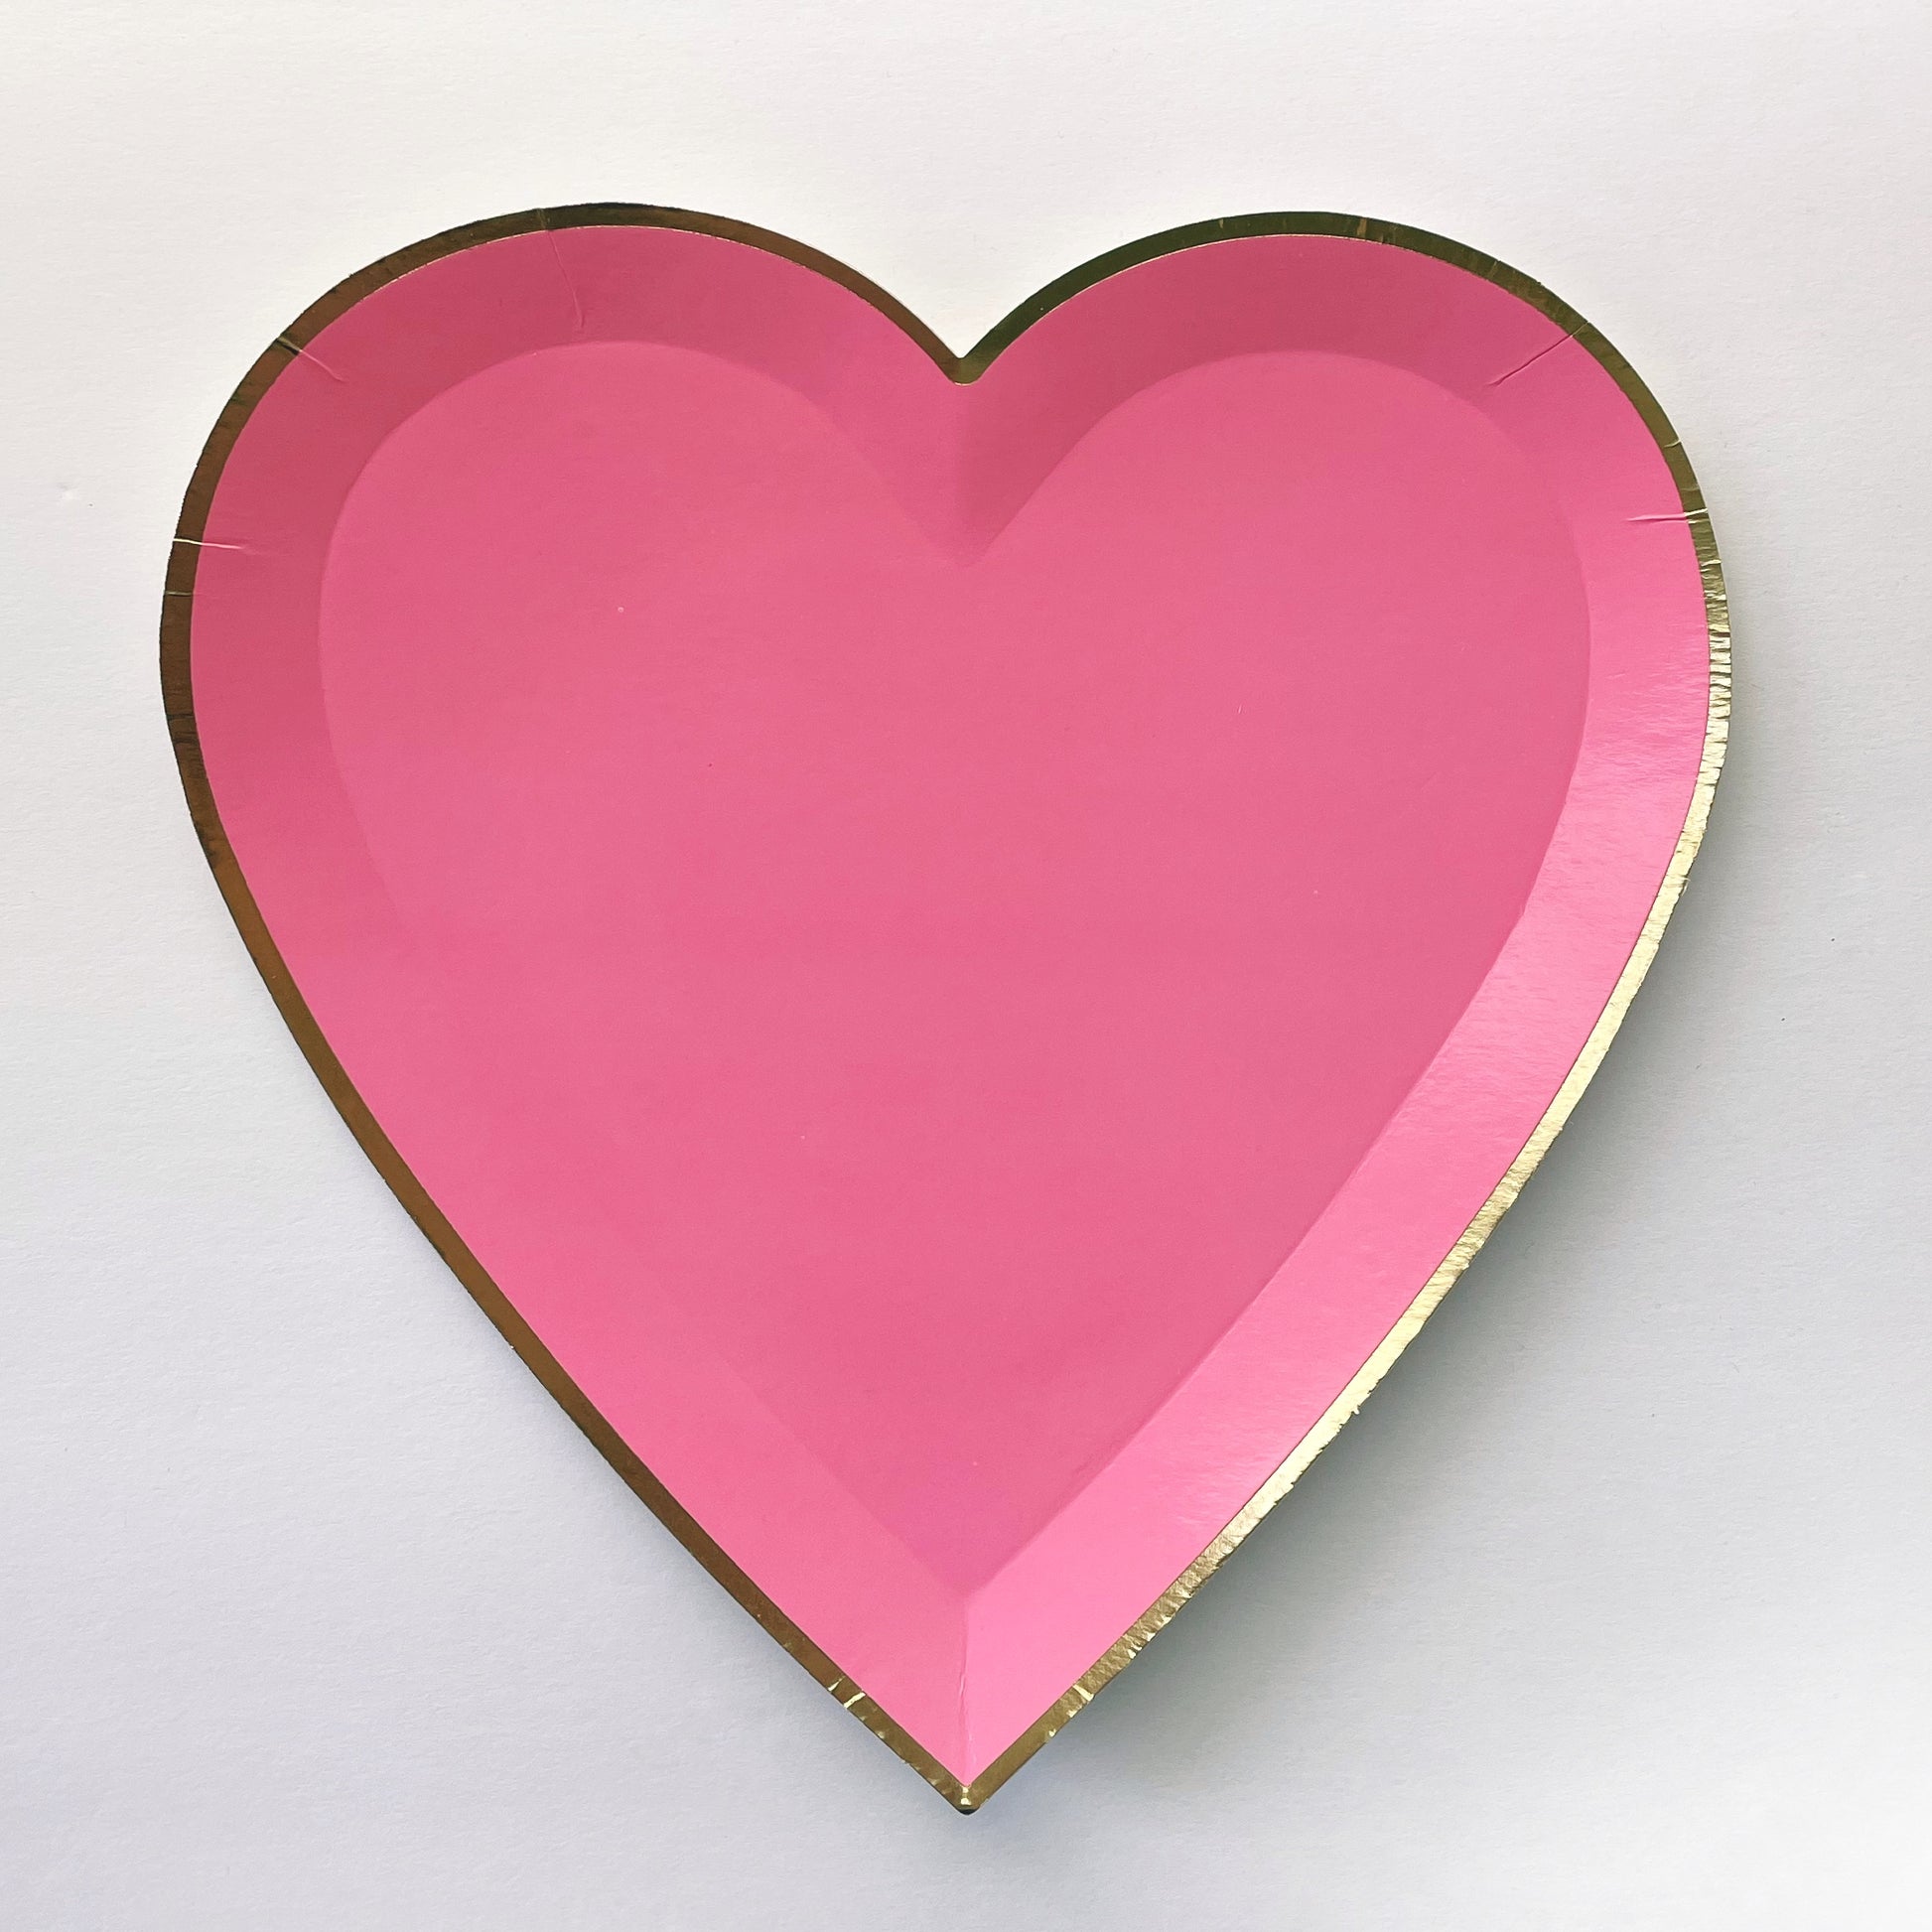 Bright pink heart shaped large party plate, with a gold foil edge.